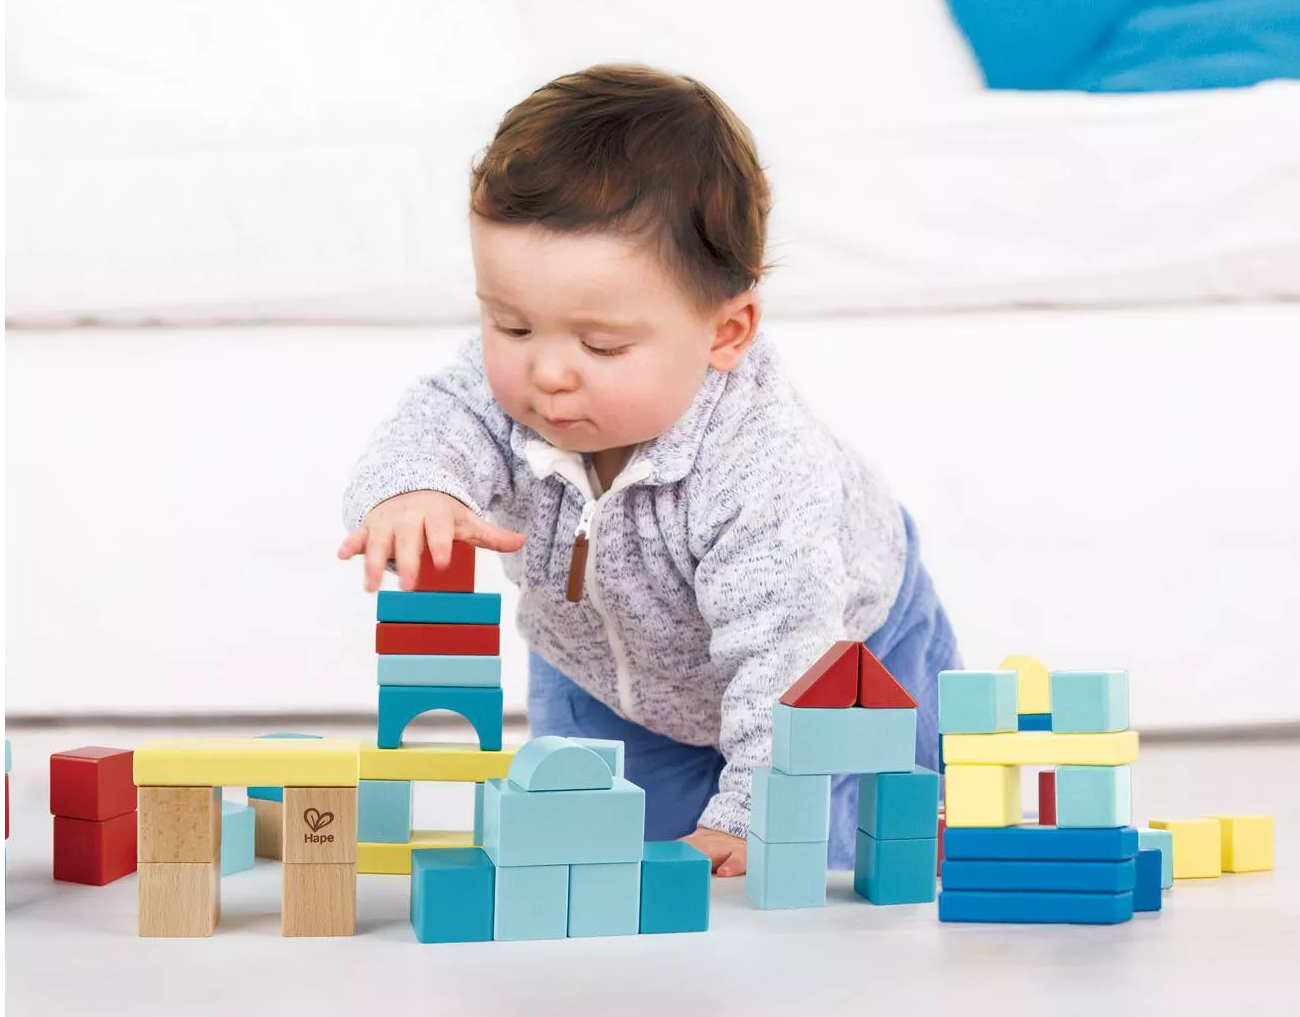 Child model playing with colorful building blocks